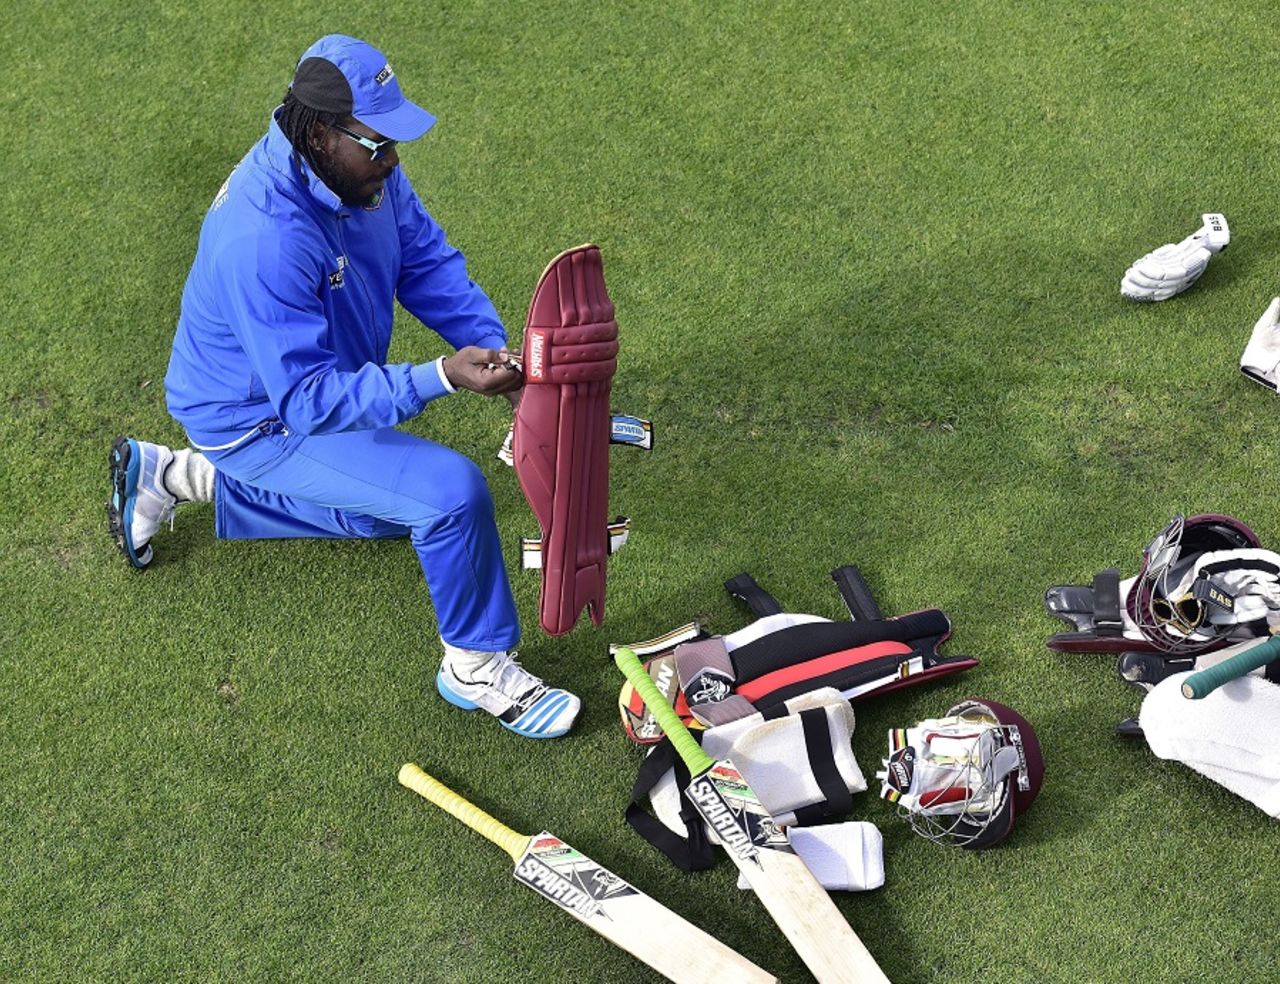 Chris Gayle with his artillery, New Zealand v West indies, World Cup 2015, 4th quarter-final, Wellington, March 20, 2015